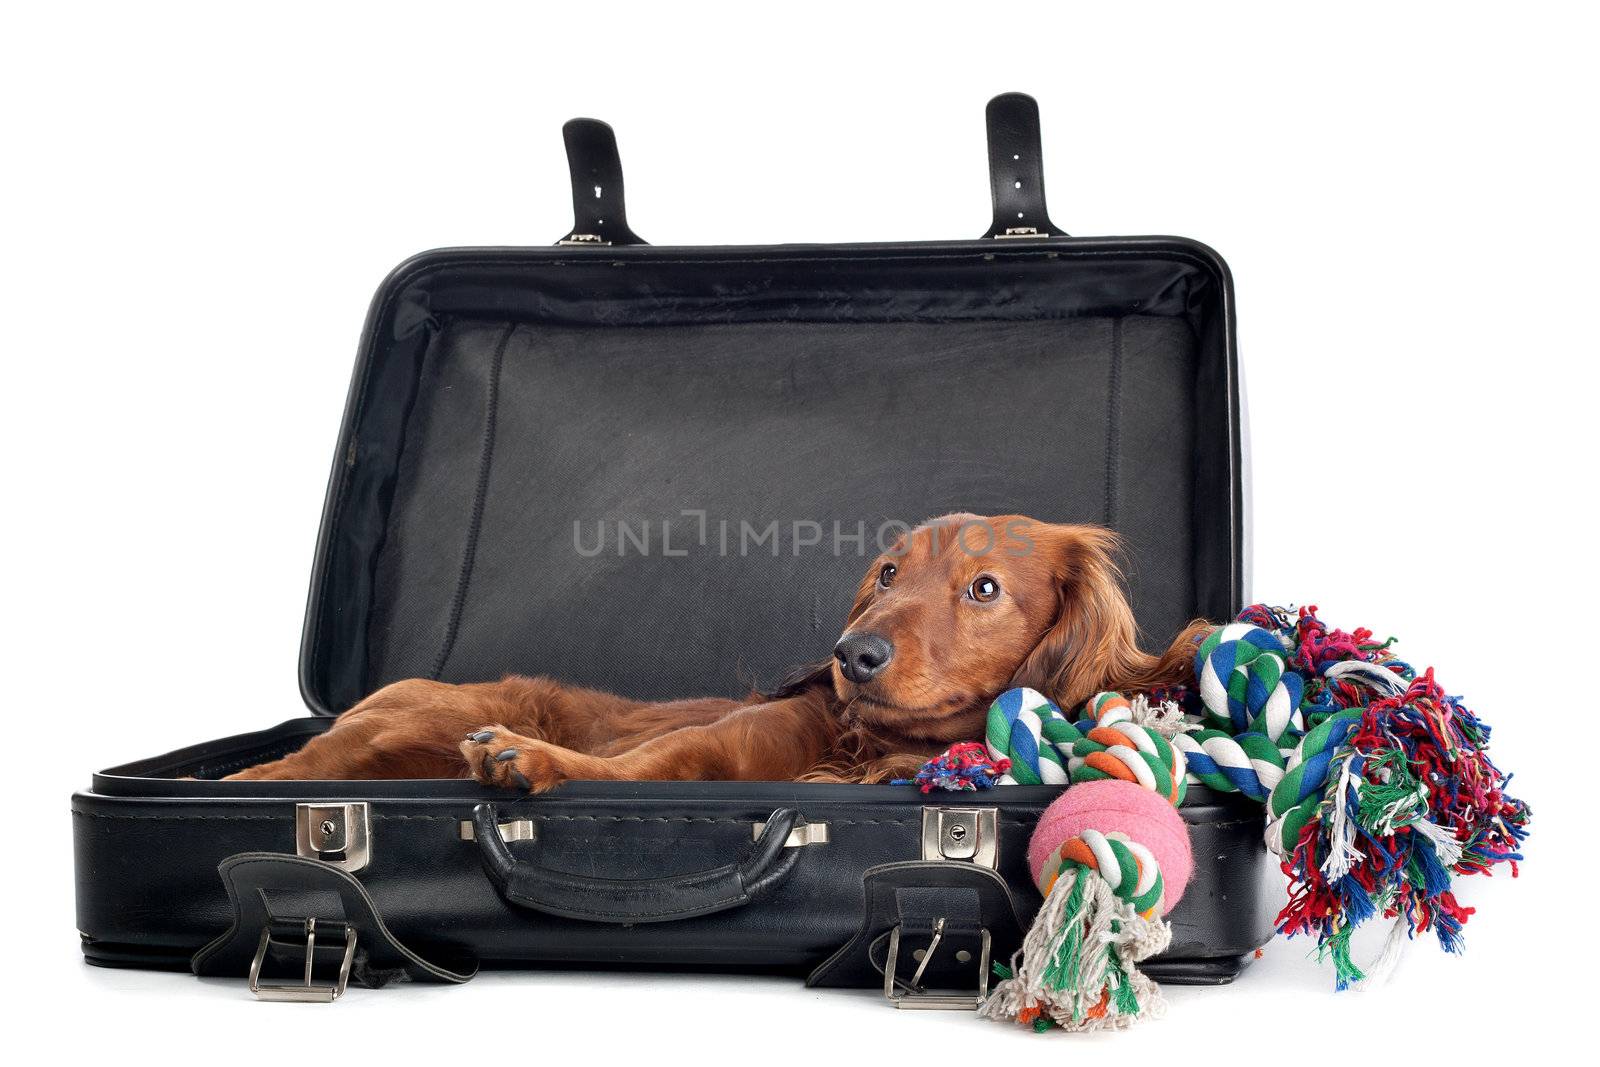 Dog resting in suitcase by eriklam